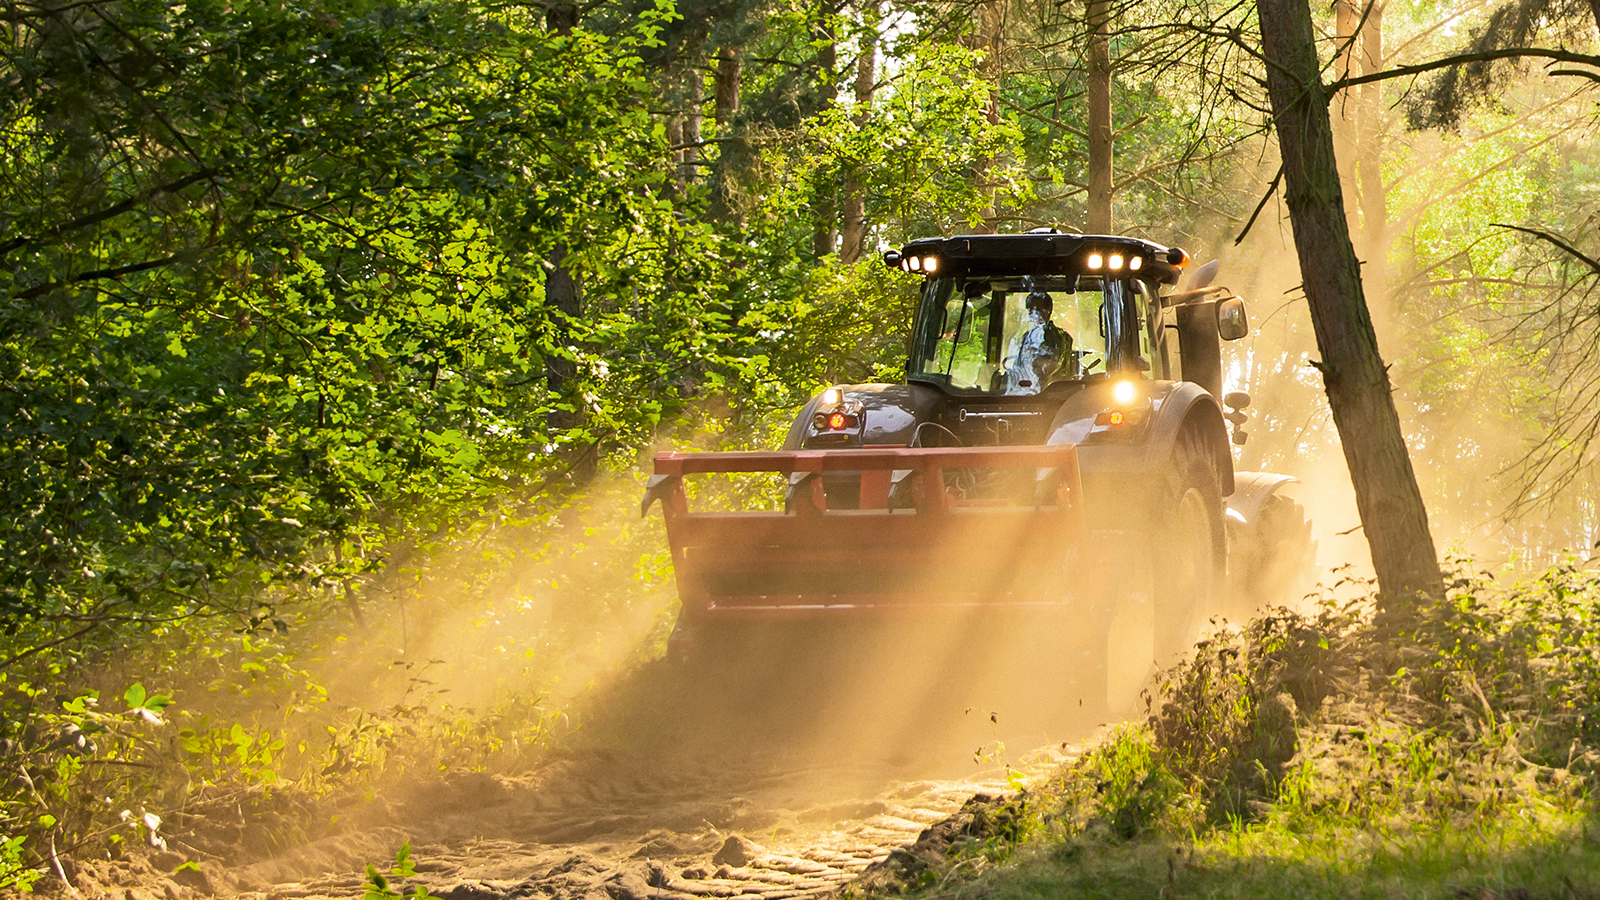 altra twintrac tractor in forest